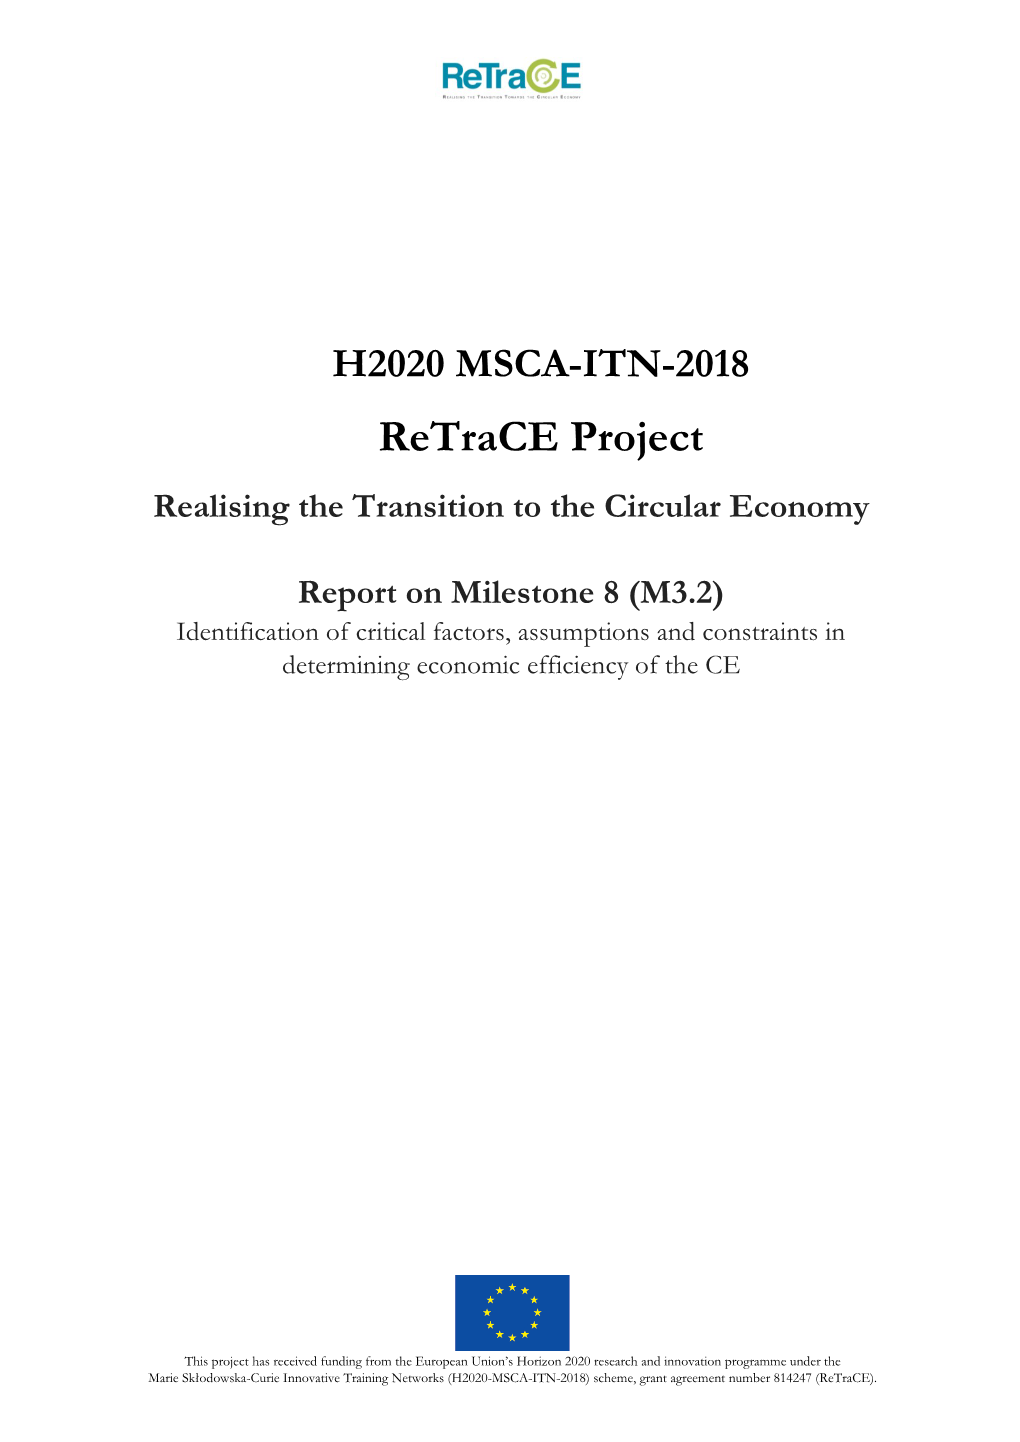 H2020 MSCA-ITN-2018 Retrace Project Realising the Transition To